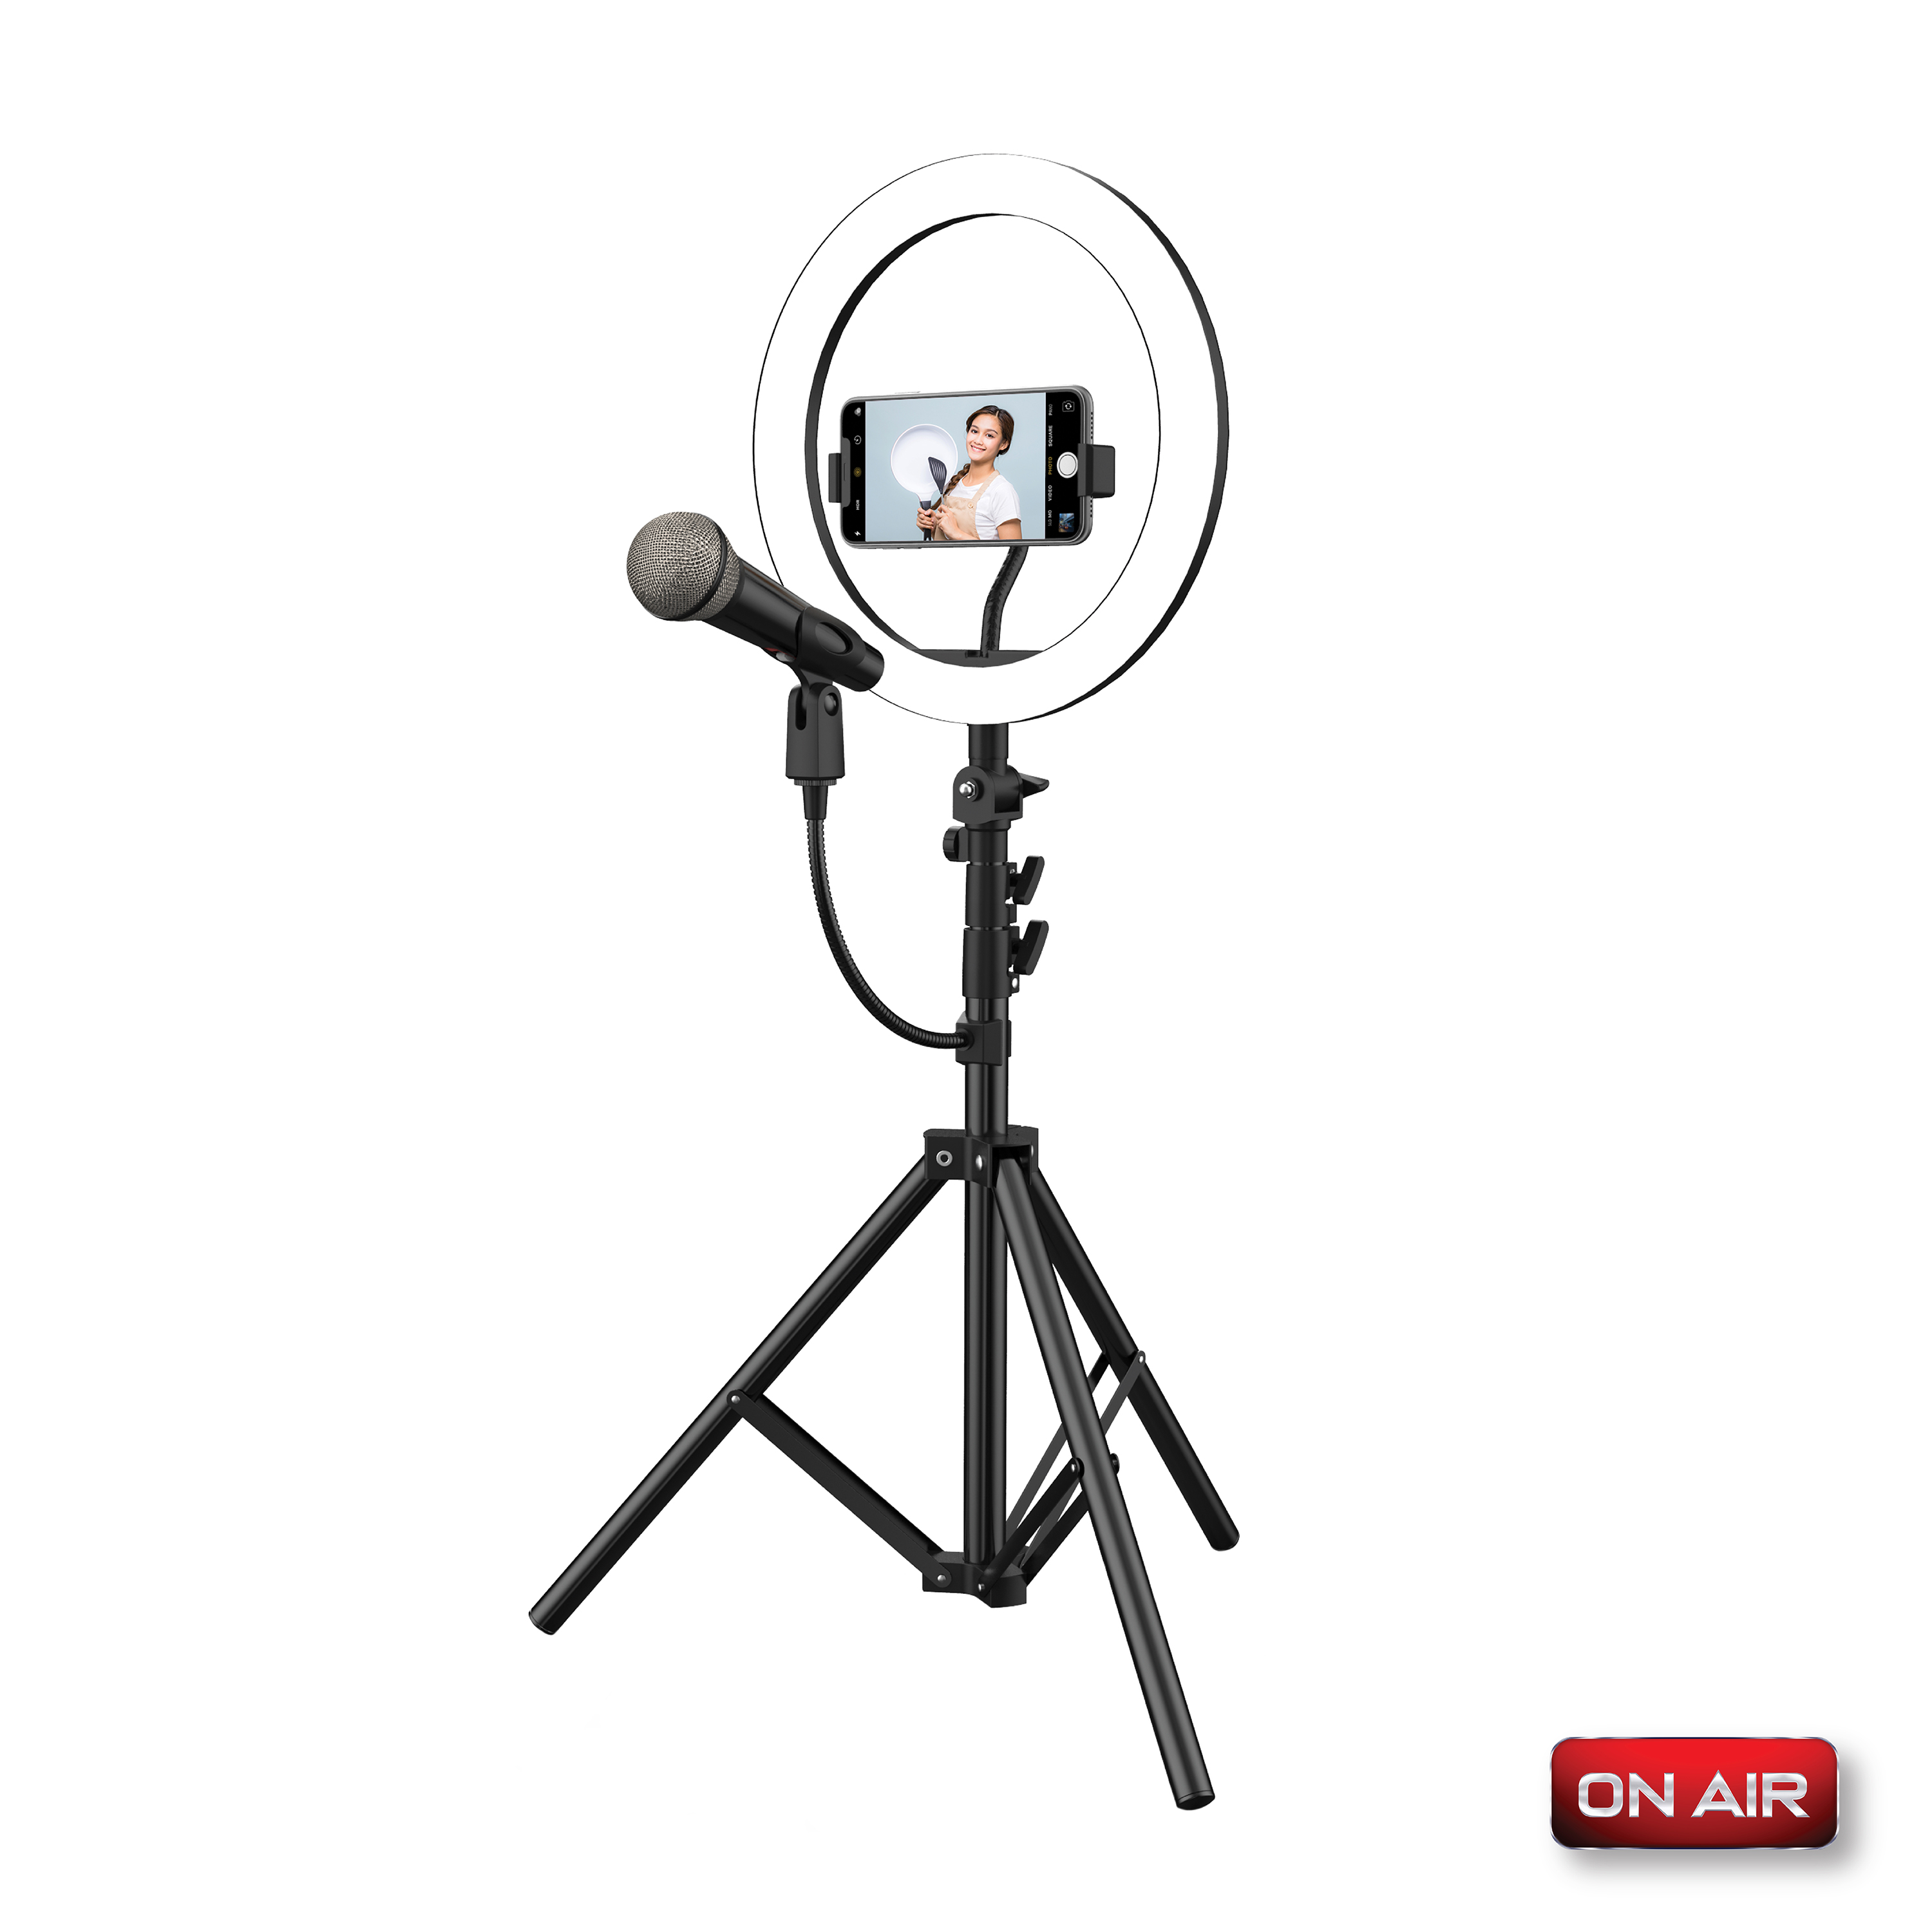 ON AIR 8” Portable LED Ring Light with Desktop Stand and Phone Holder